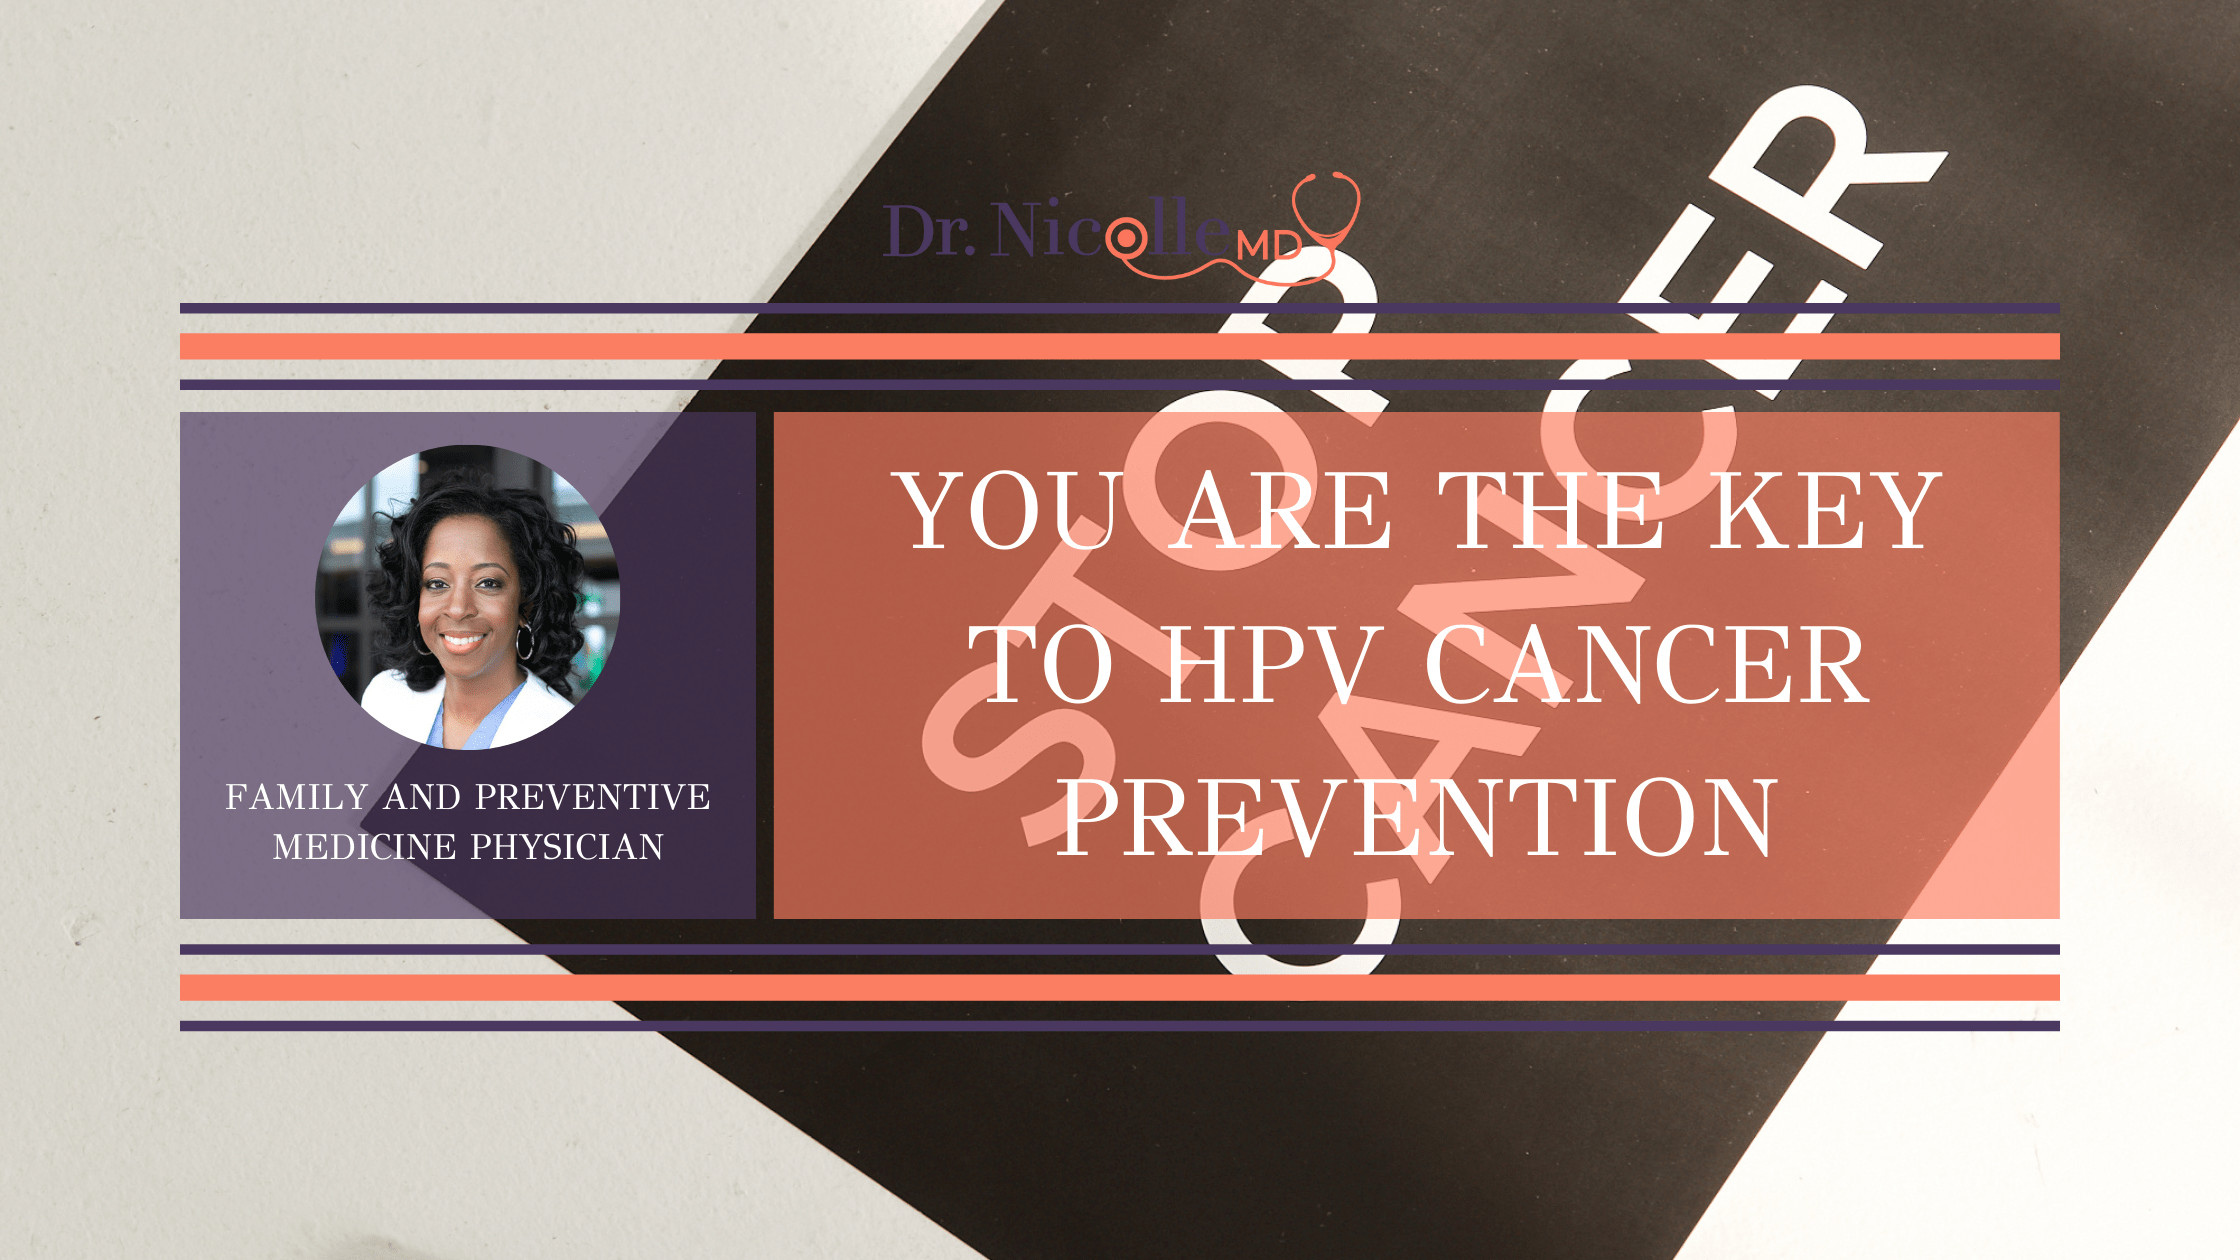 11You Are the Key to HPV Cancer Prevention